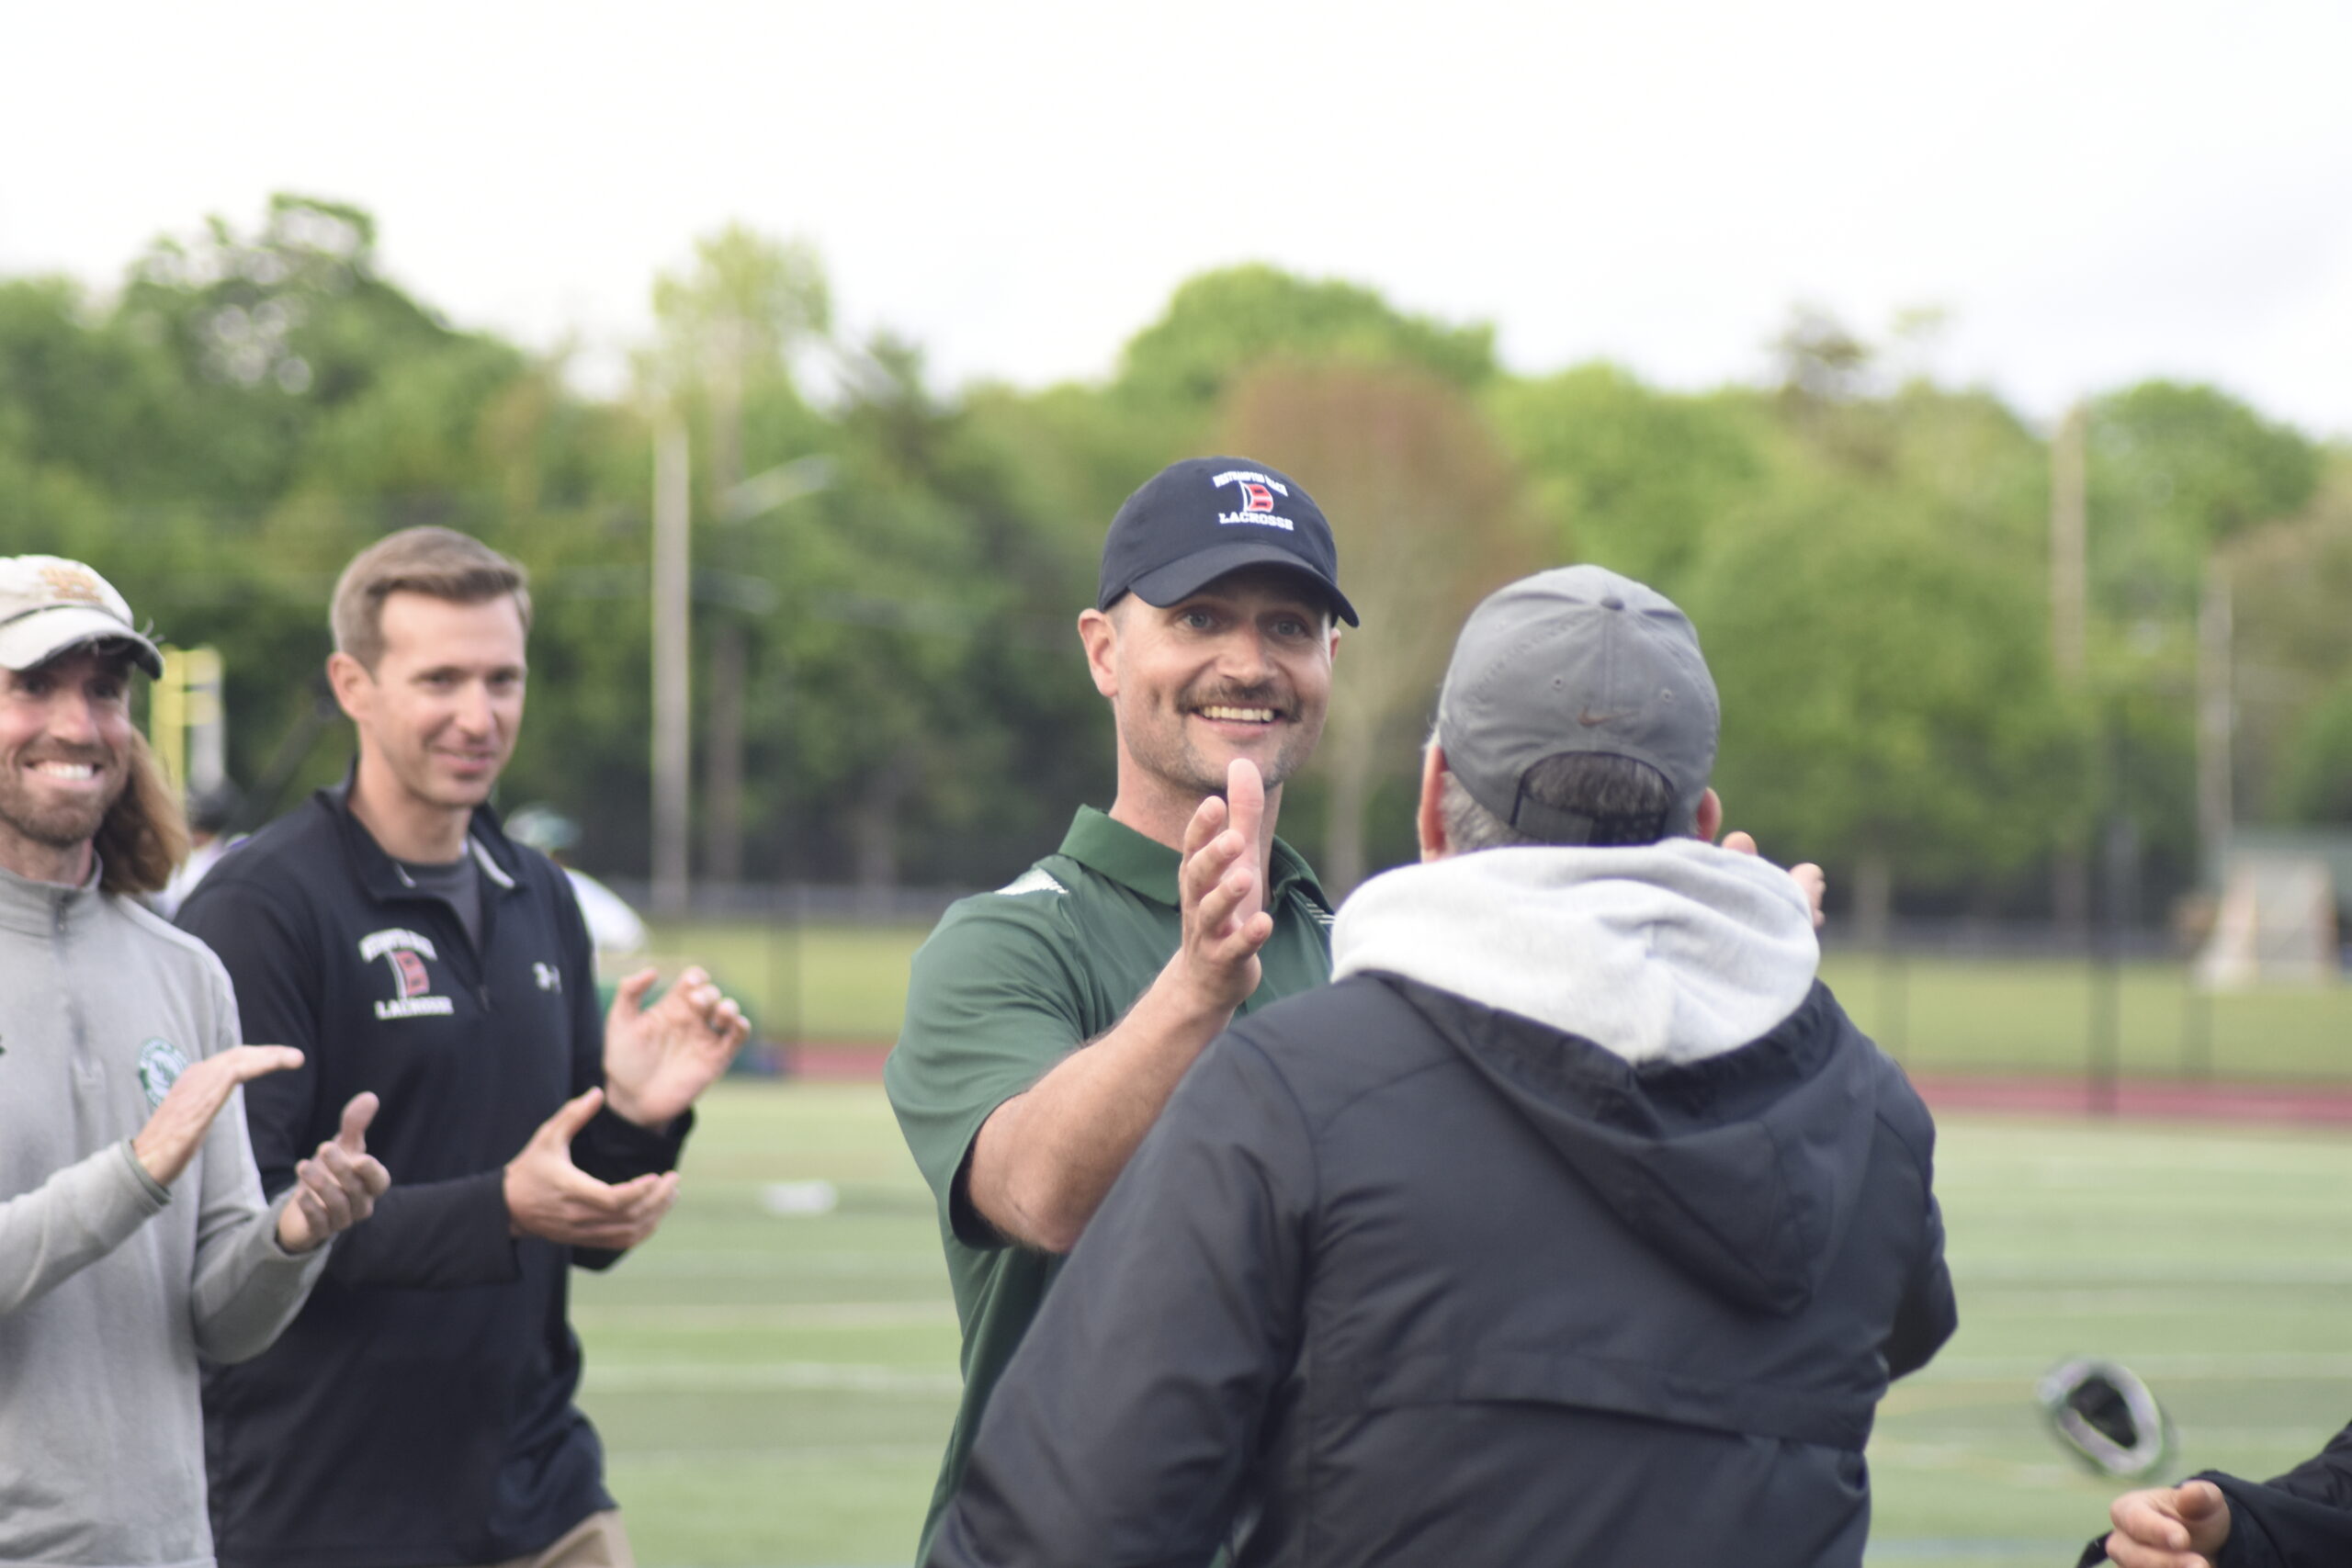 Westhampton Beach head coach Drew Peters, assistant coach Ralph Naglieri and the rest of the coaching staff congratulate one another on their first playoff win.   DREW BUDD